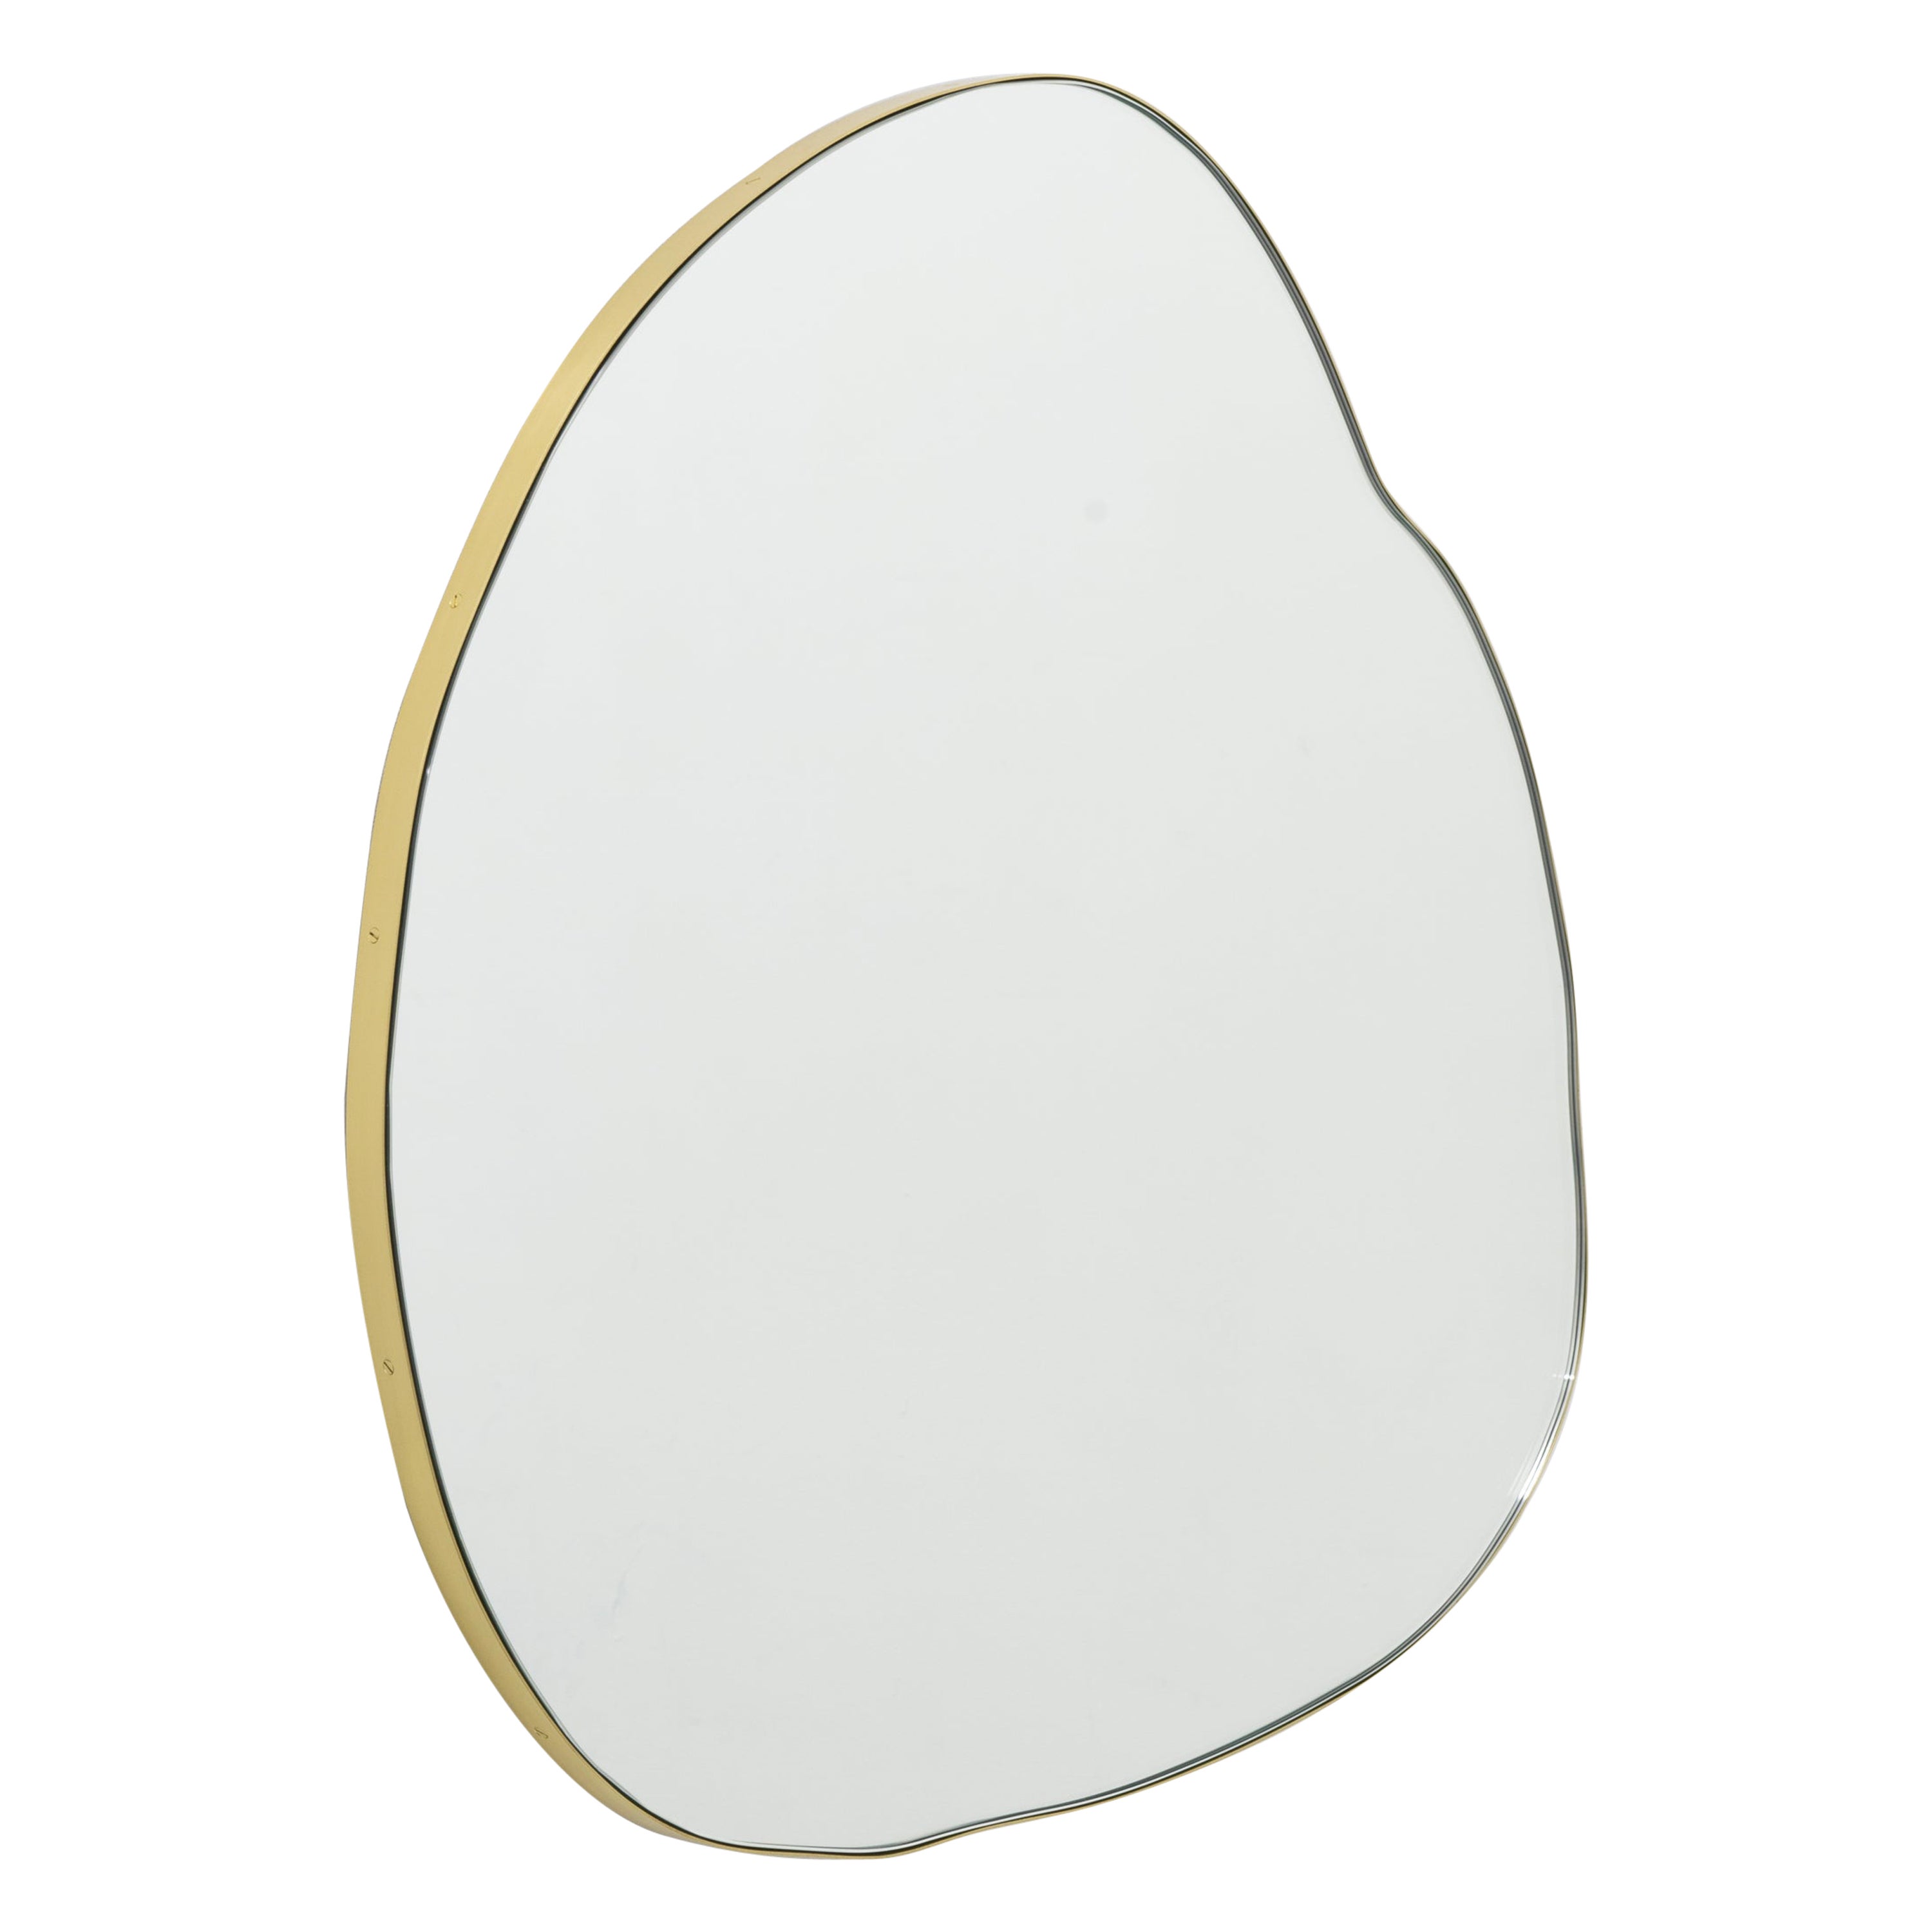 Ergon Organic Shaped Modern Customisable Mirror with a Brass Frame, Large